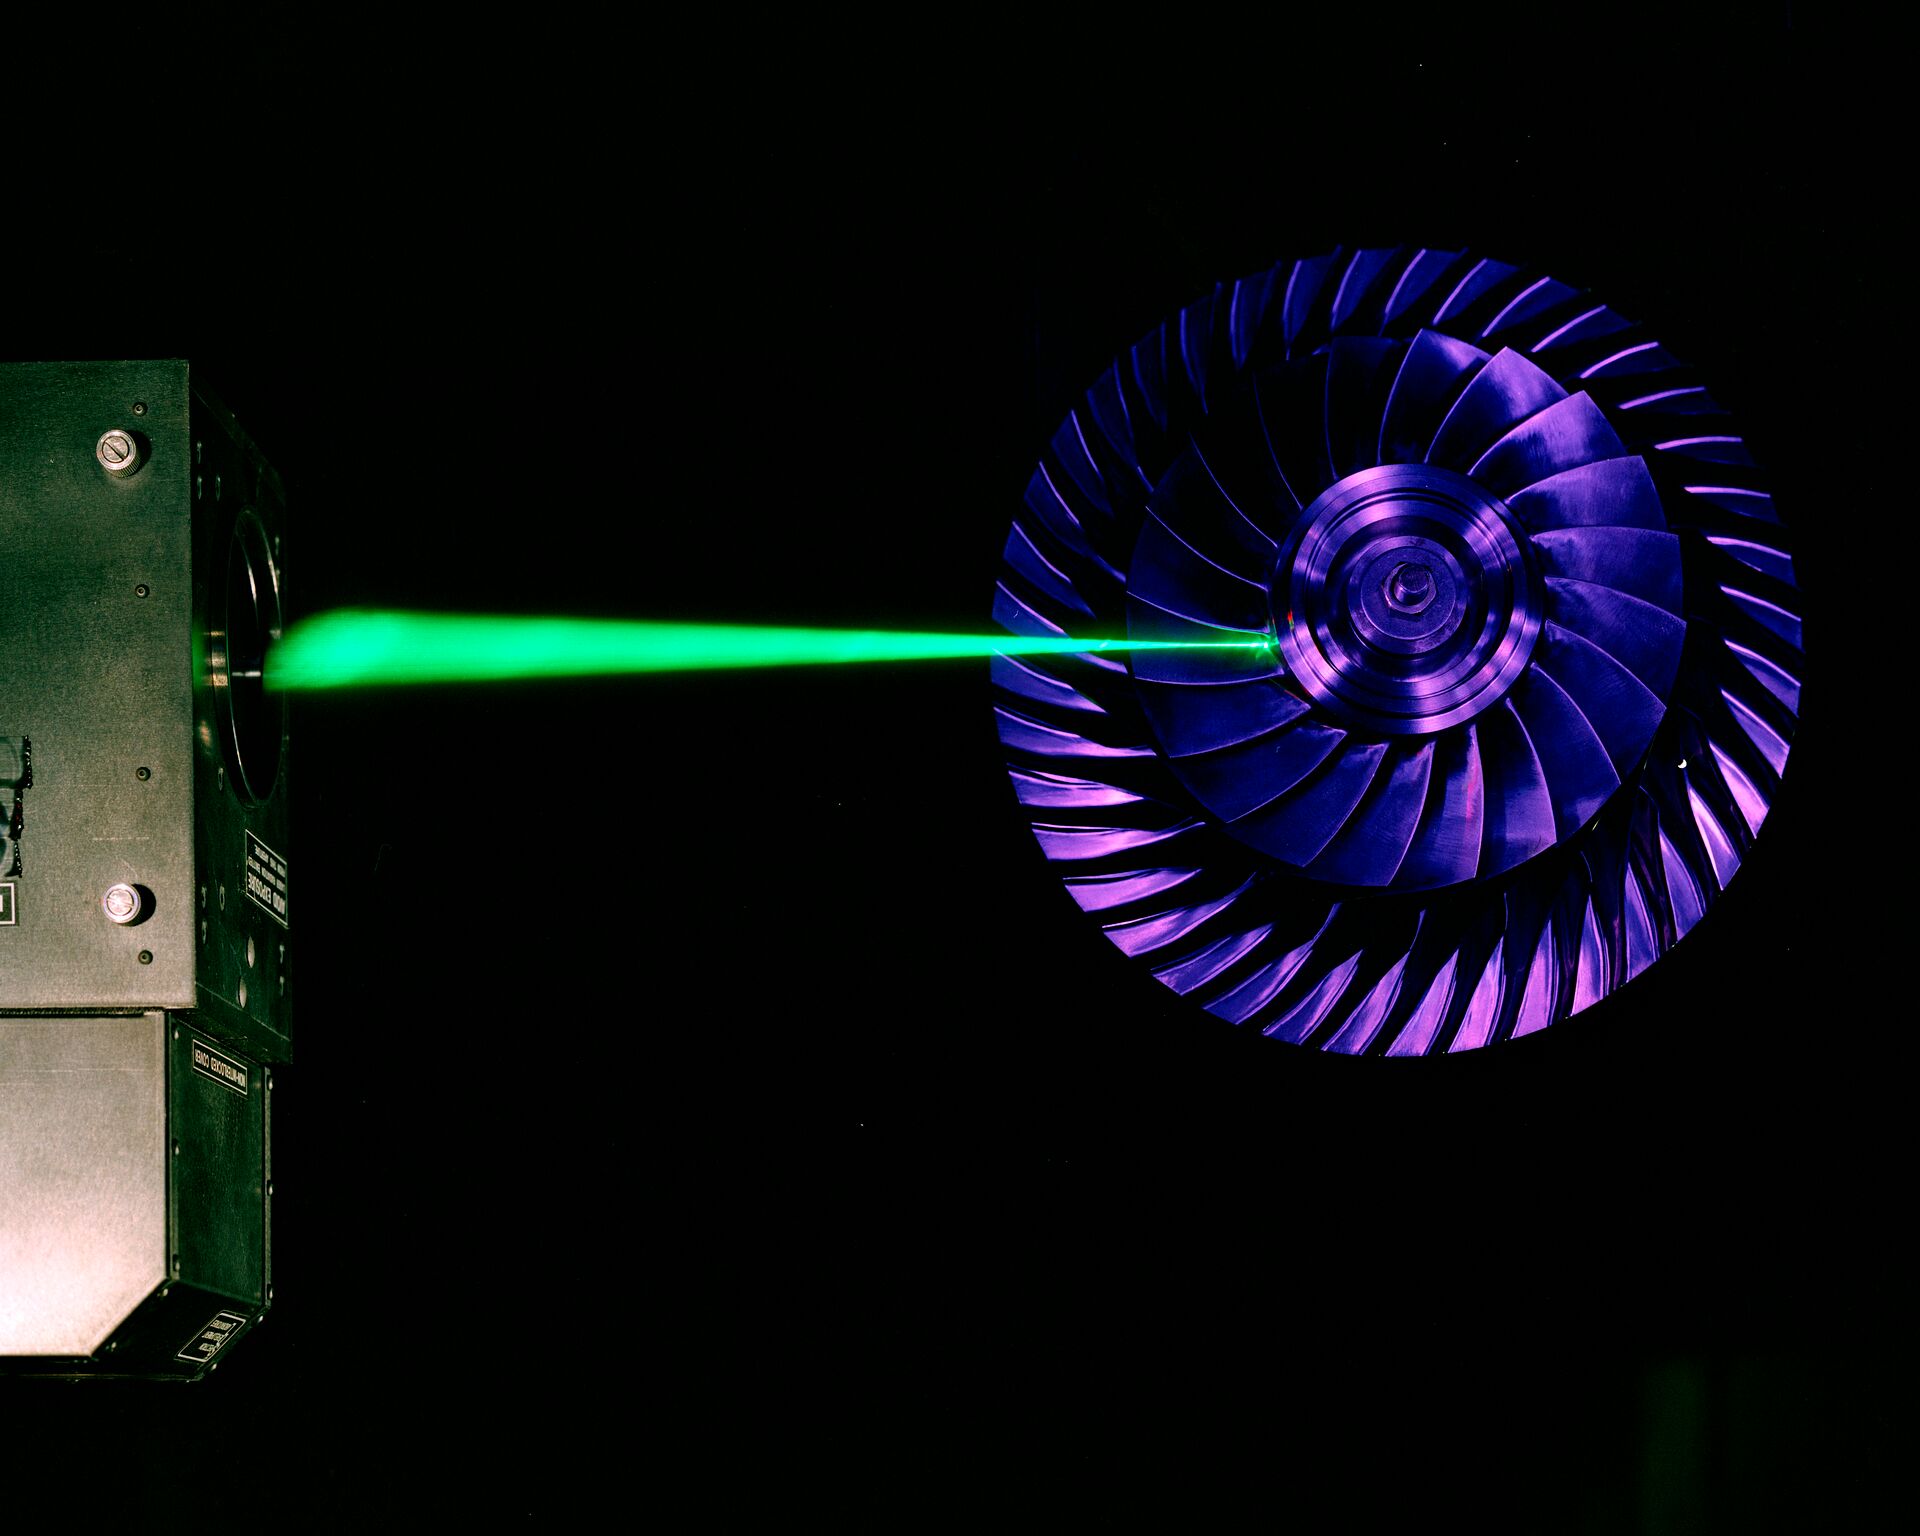 A green laser beam being pointed at an advanced centrifugal compressor.